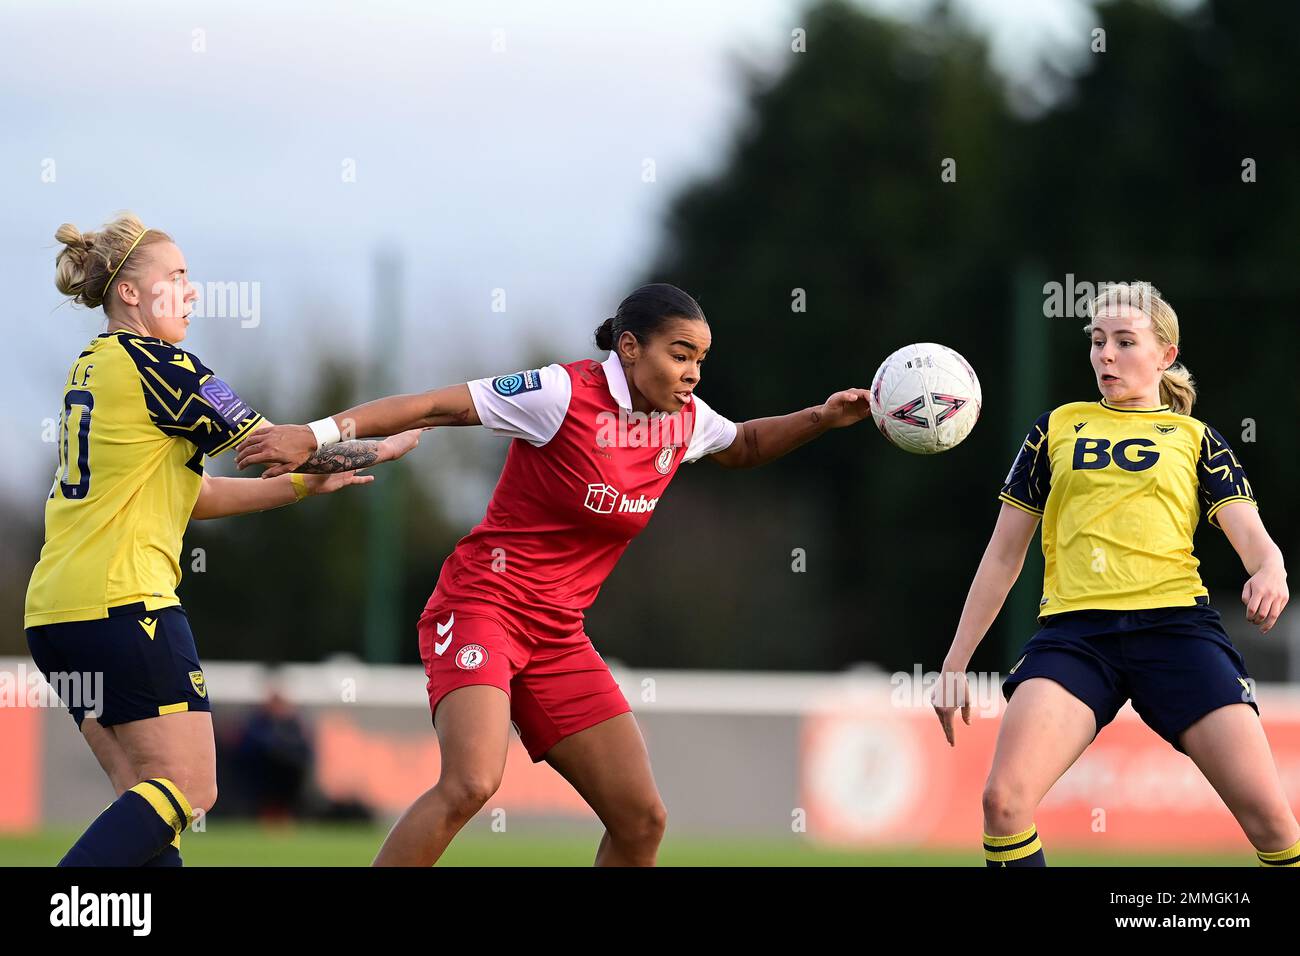 Bristol, UK. 29th January, 2023. Shania Hayles of Bristol City Women battles with Carly Johns of Oxford United W.F.C. - Mandatory by-line: Ashley Crowden  - 29/01/2023 - FOOTBALL - Robins High Performance Centre - Bristol, England - Bristol City Women vs Oxford United Women - The Women's FA Cup - Fourth Round Credit: Ashley Crowden/Alamy Live News Stock Photo